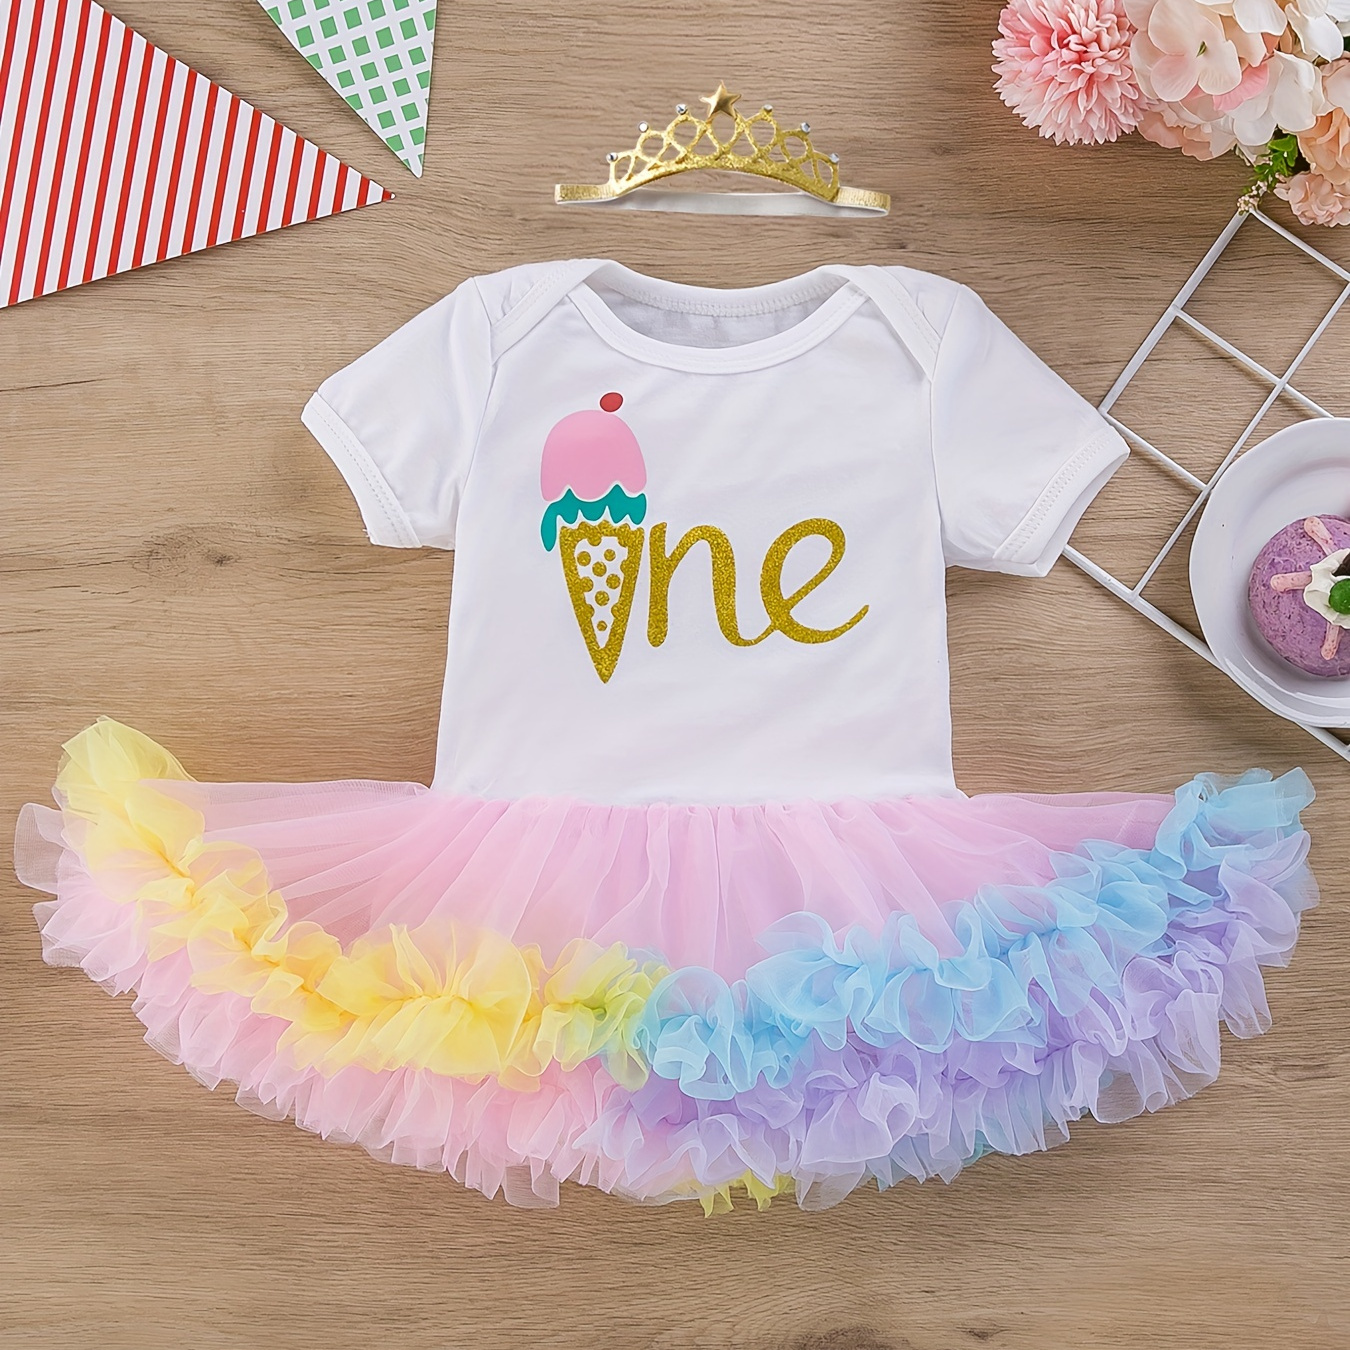 

2pcs Baby Birthday Cute Outfits, New Baby Gauze Princess Dress With Hair Decor, Holiday Party Dress Up